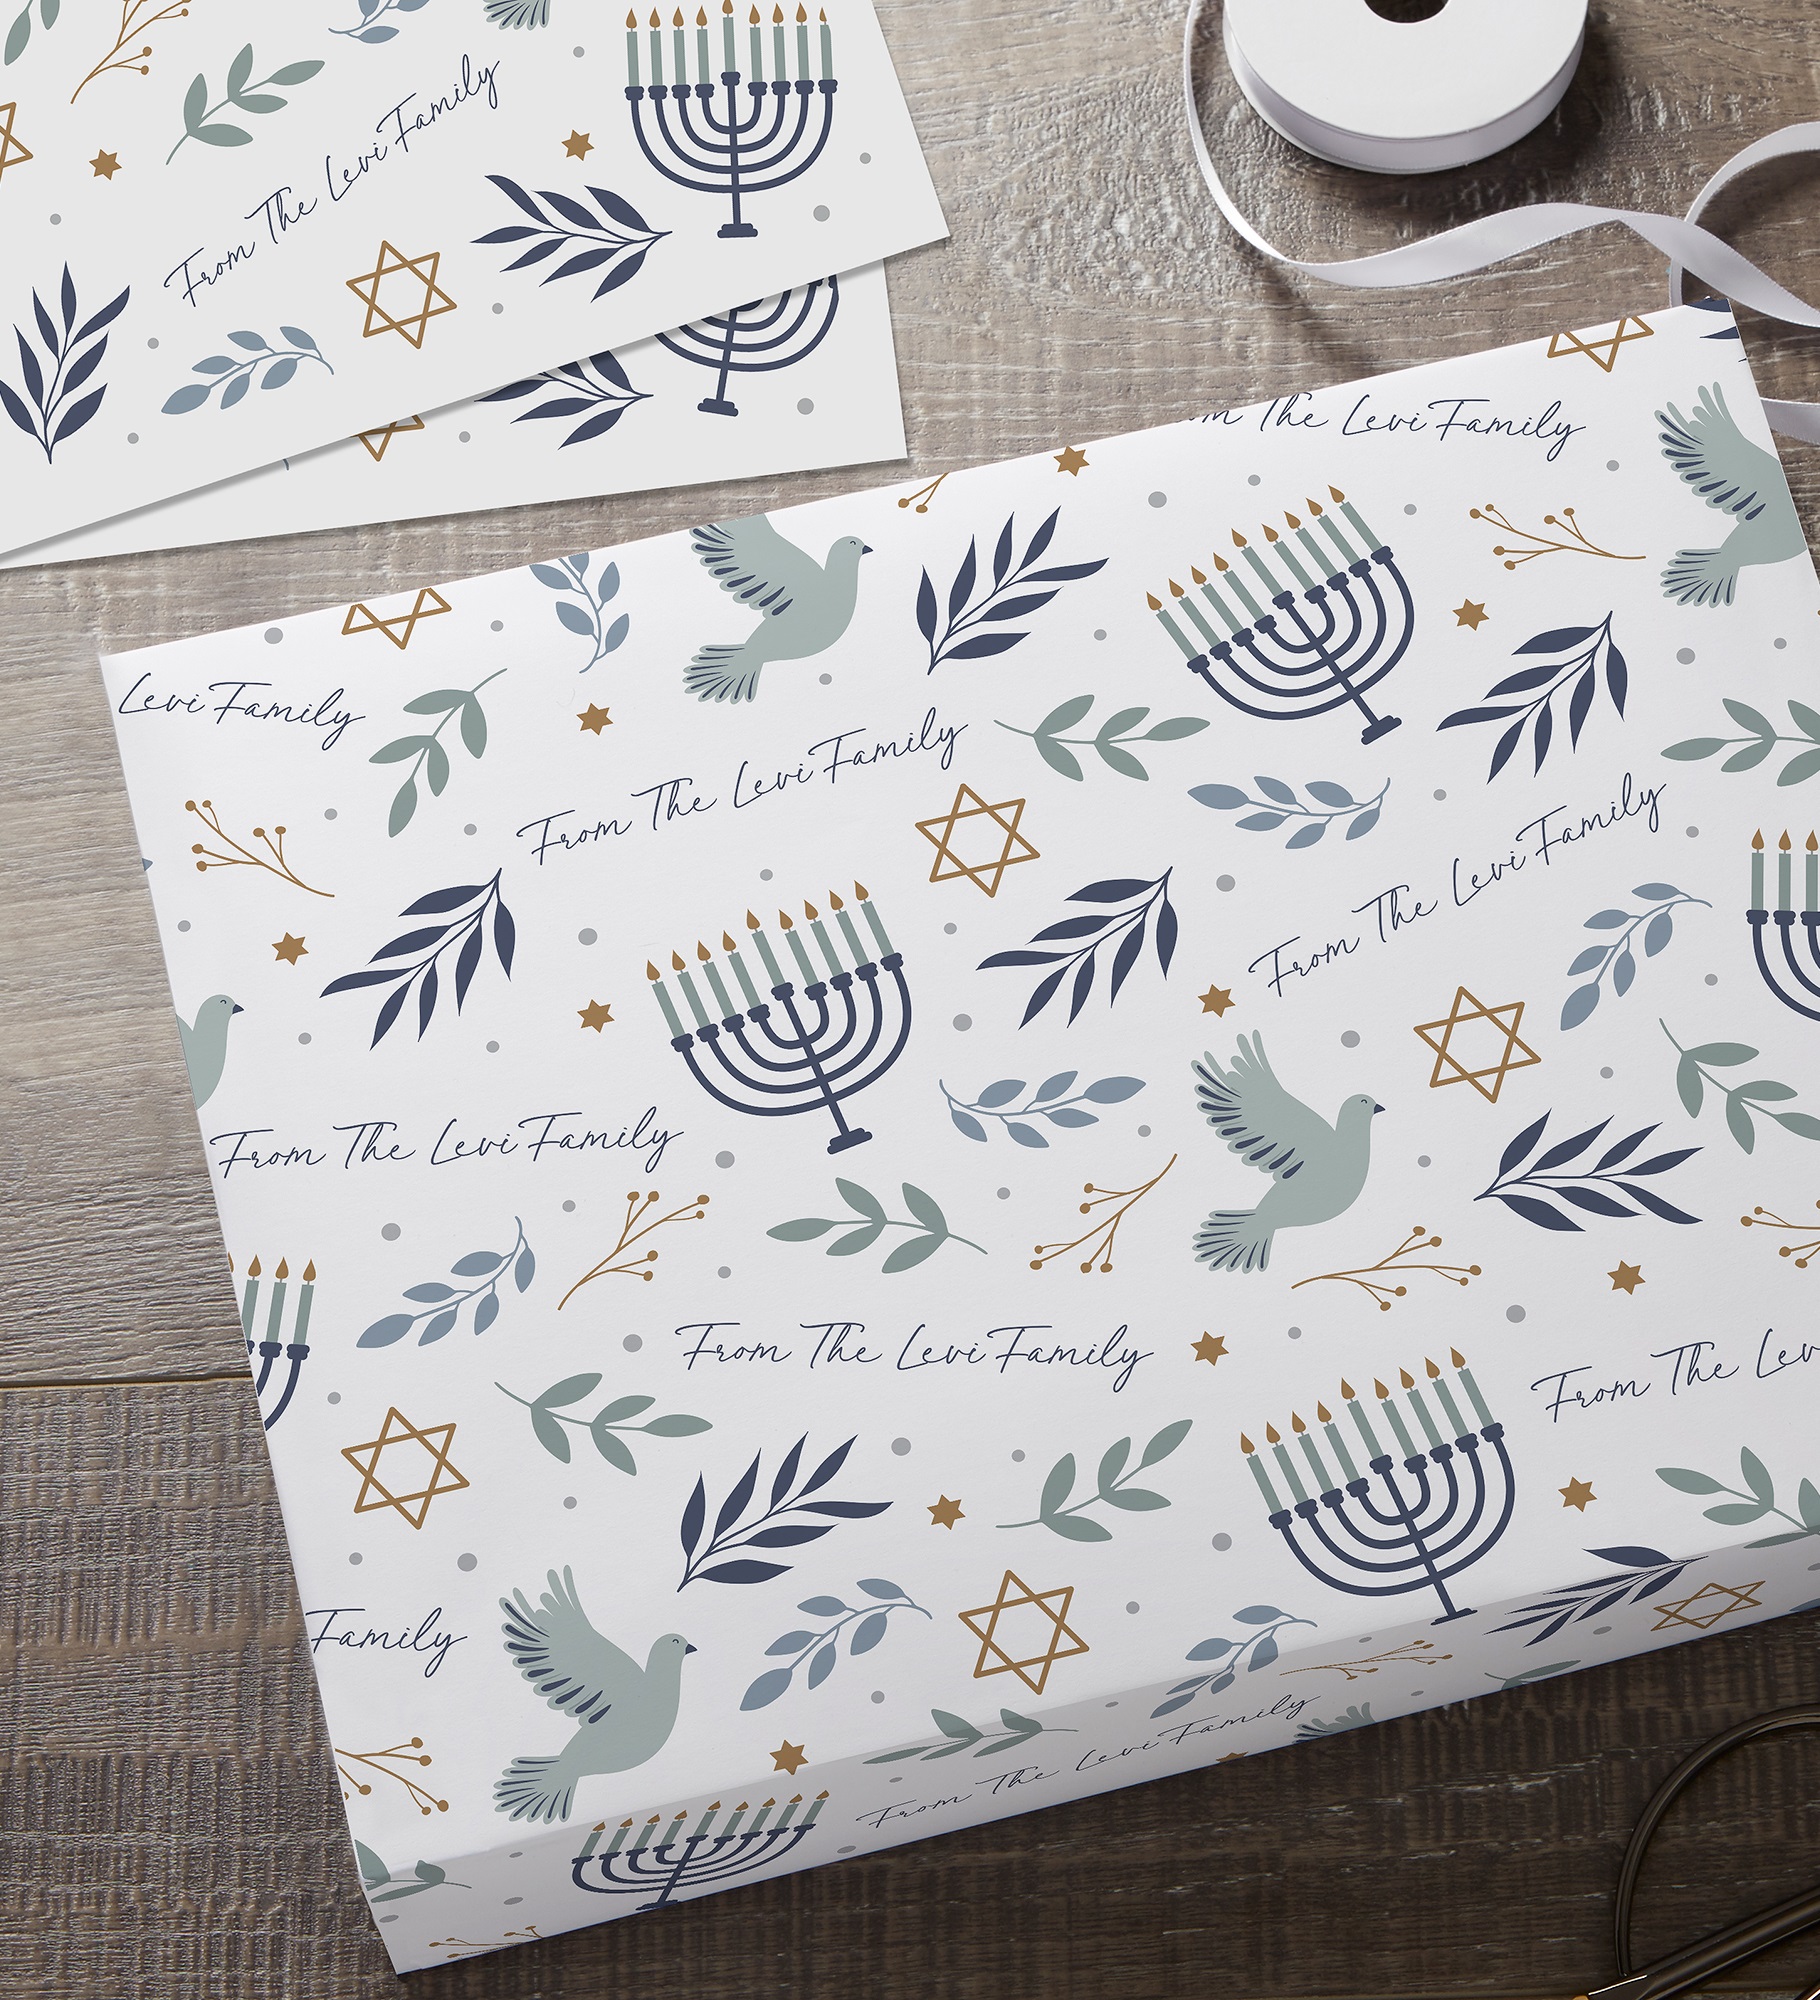 Spirit of Hanukkah Personalized Wrapping Paper